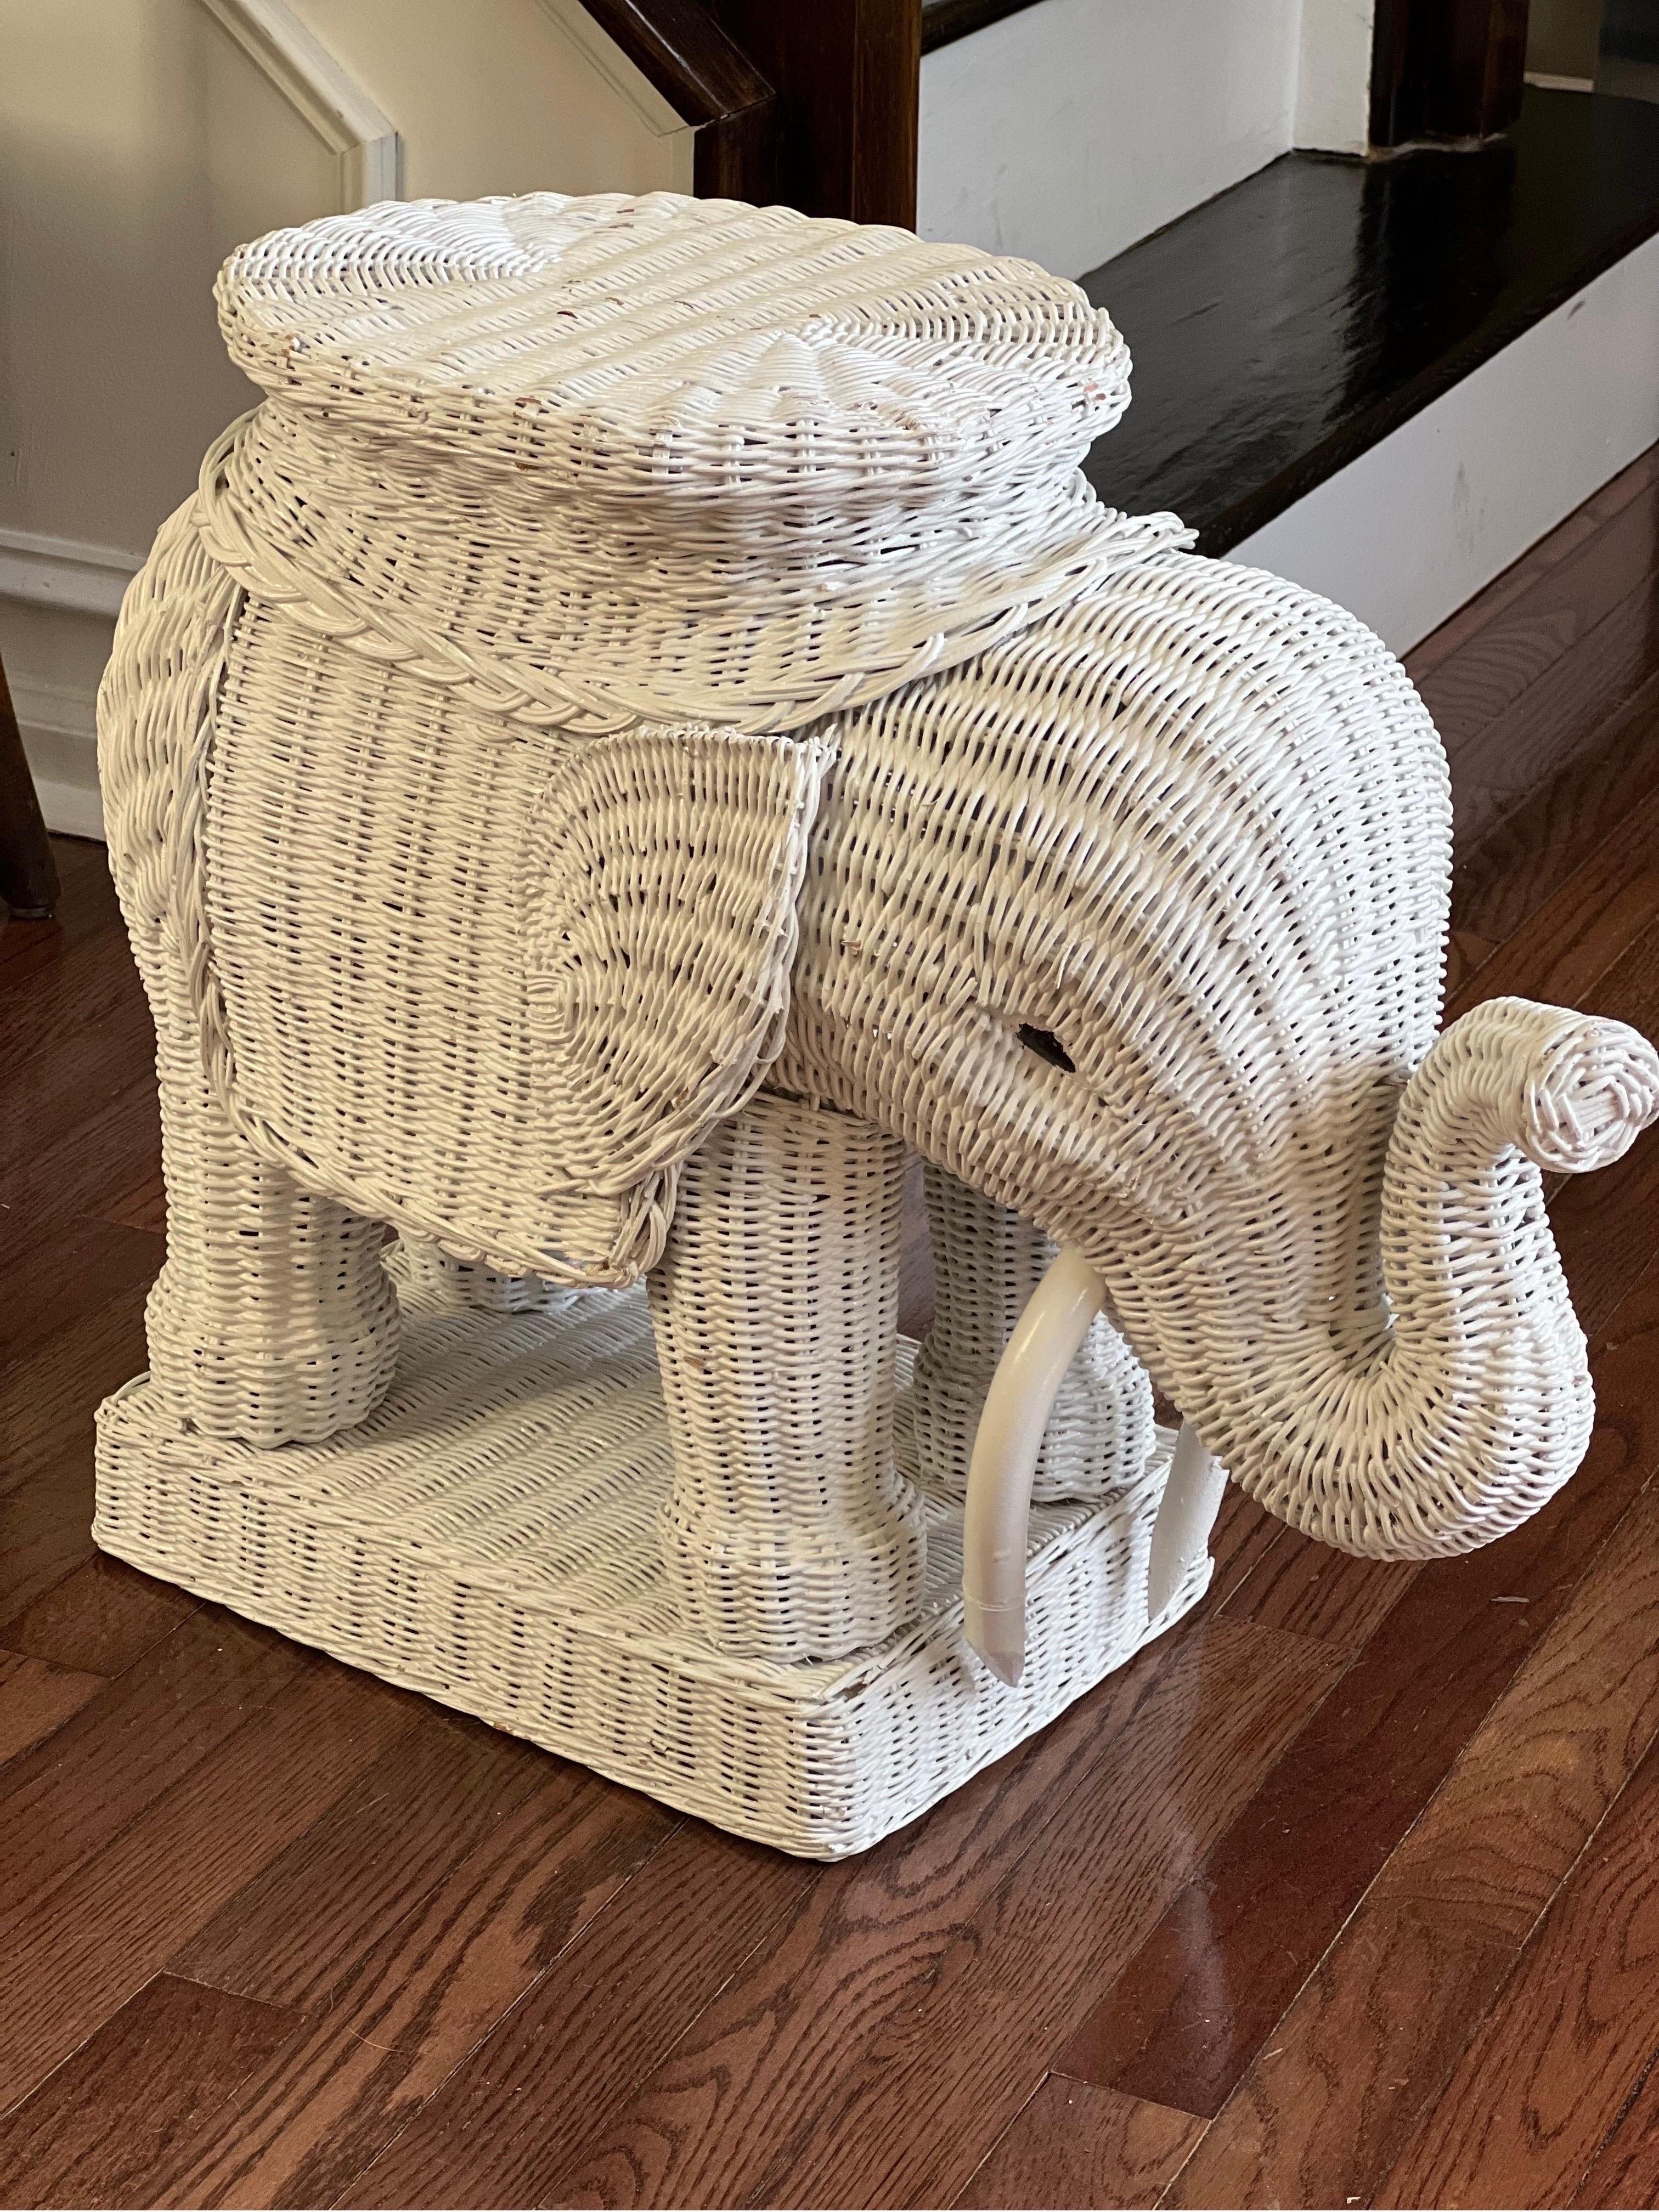 Charming vintage wicker elephant taboret table with upward trunk. Symbolizing good luck, happiness and prosperity.